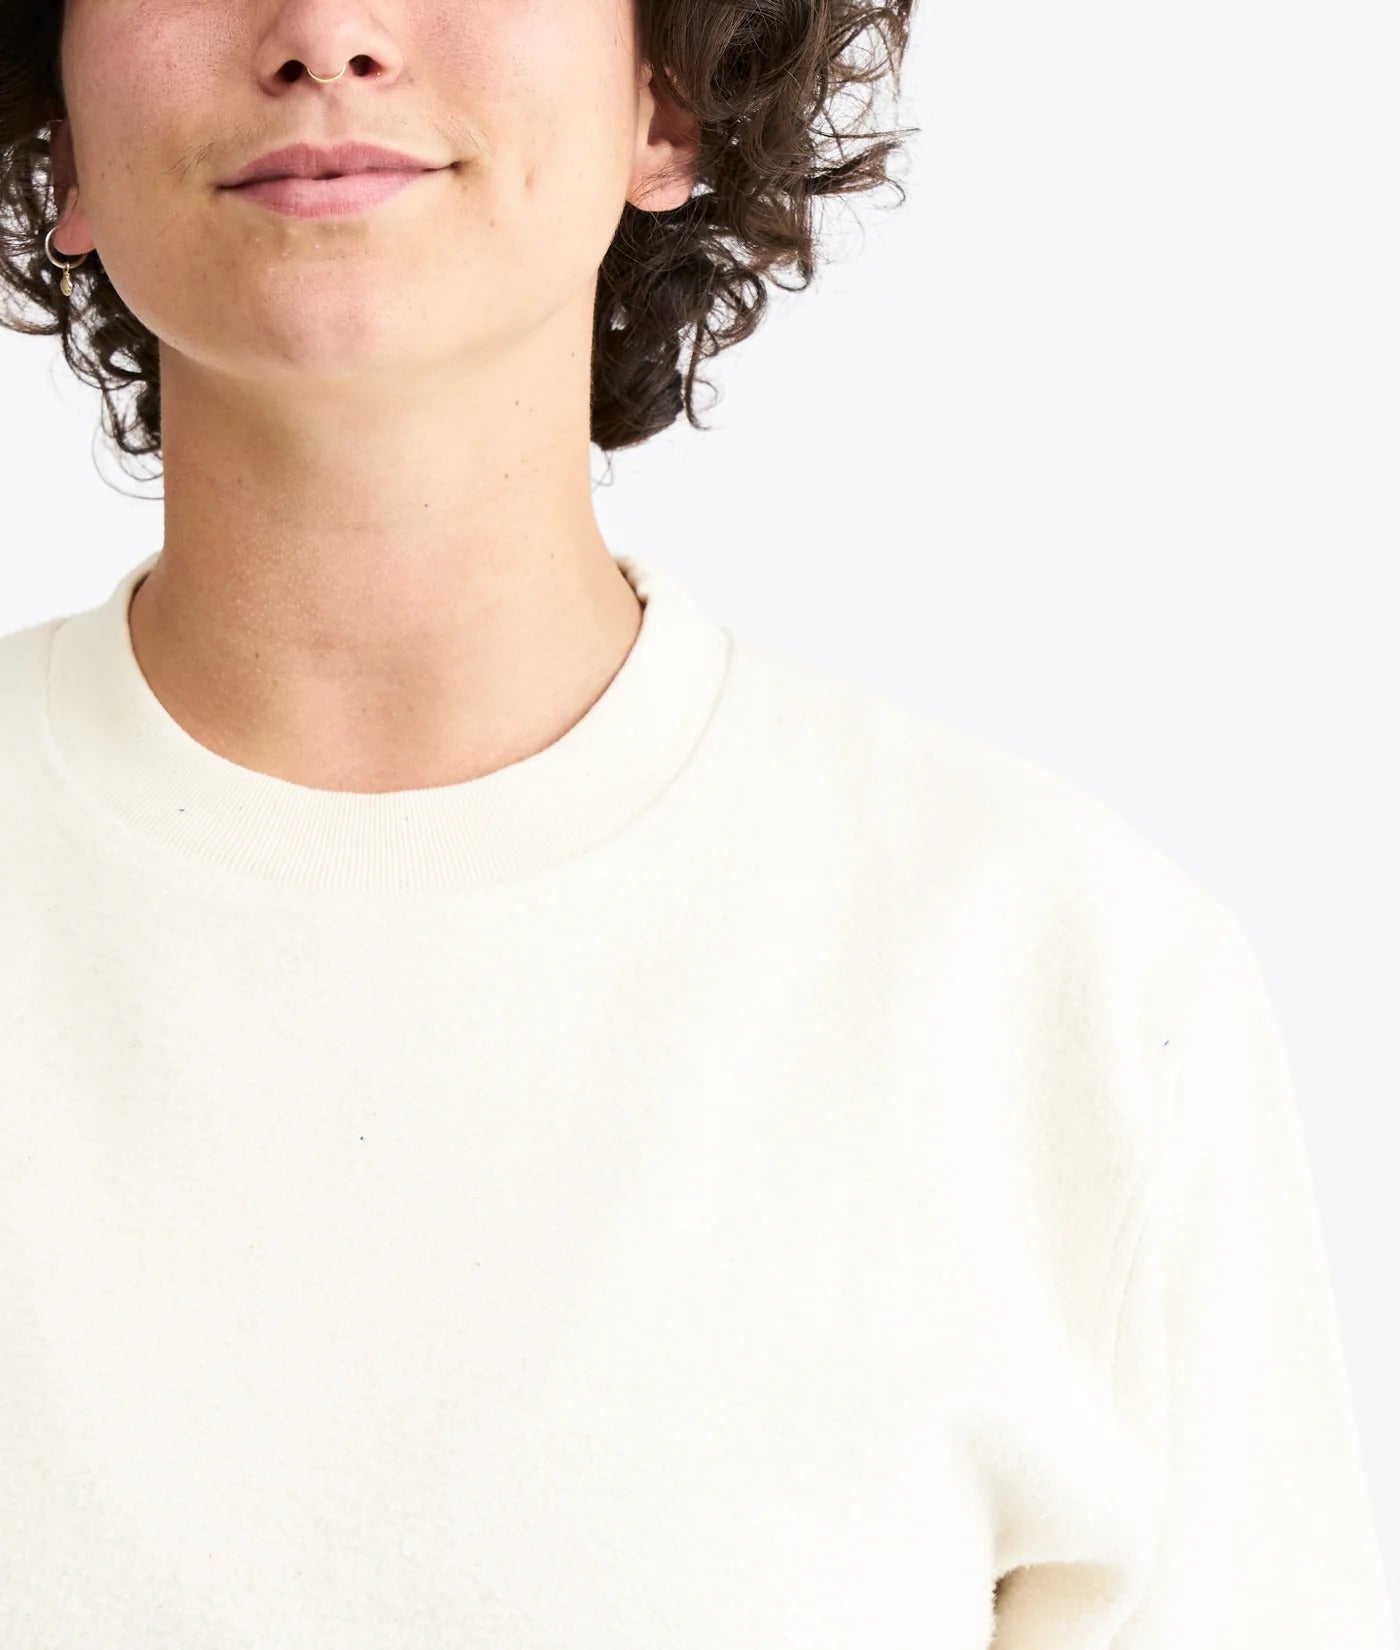 Pullover – Nations Reversed - Sweatshirt Industry of All